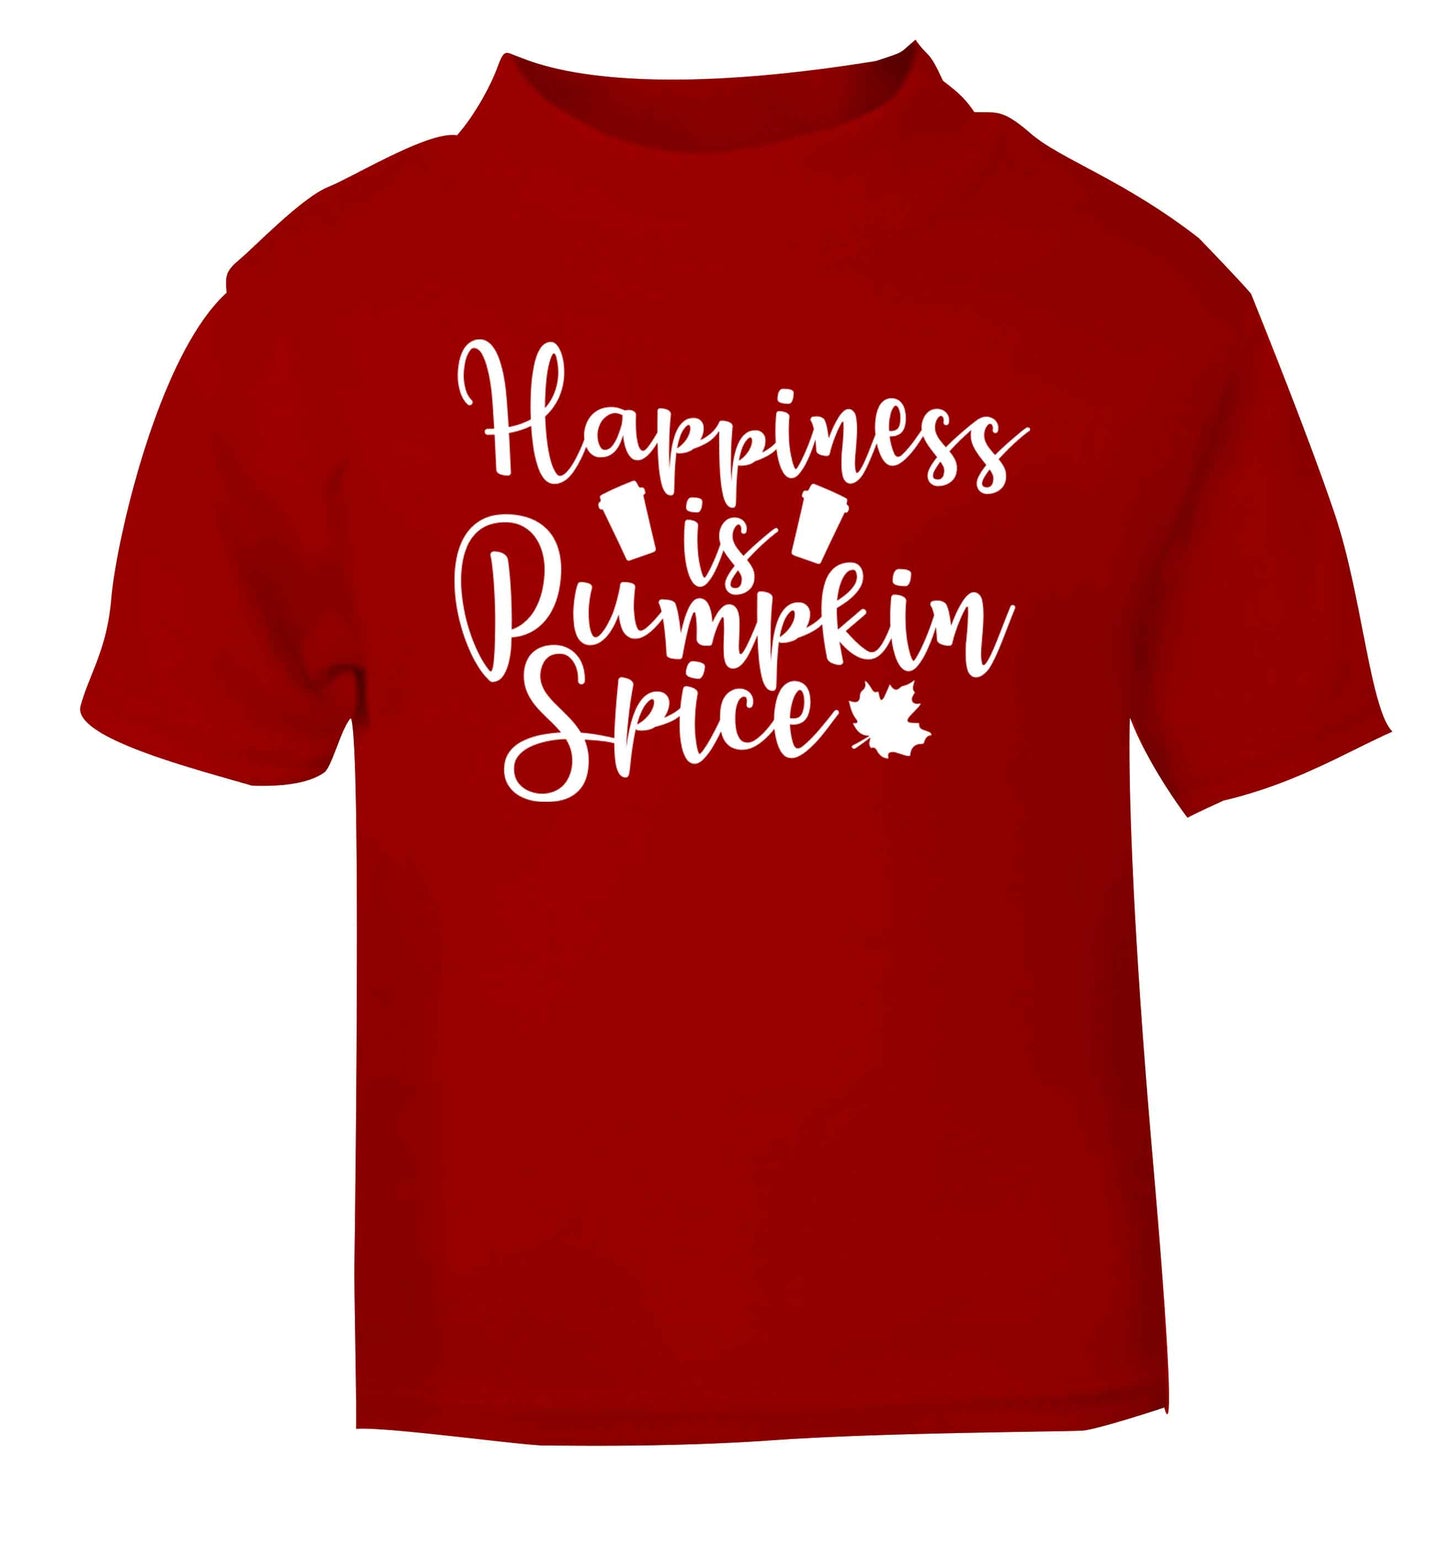 Happiness Pumpkin Spice red baby toddler Tshirt 2 Years